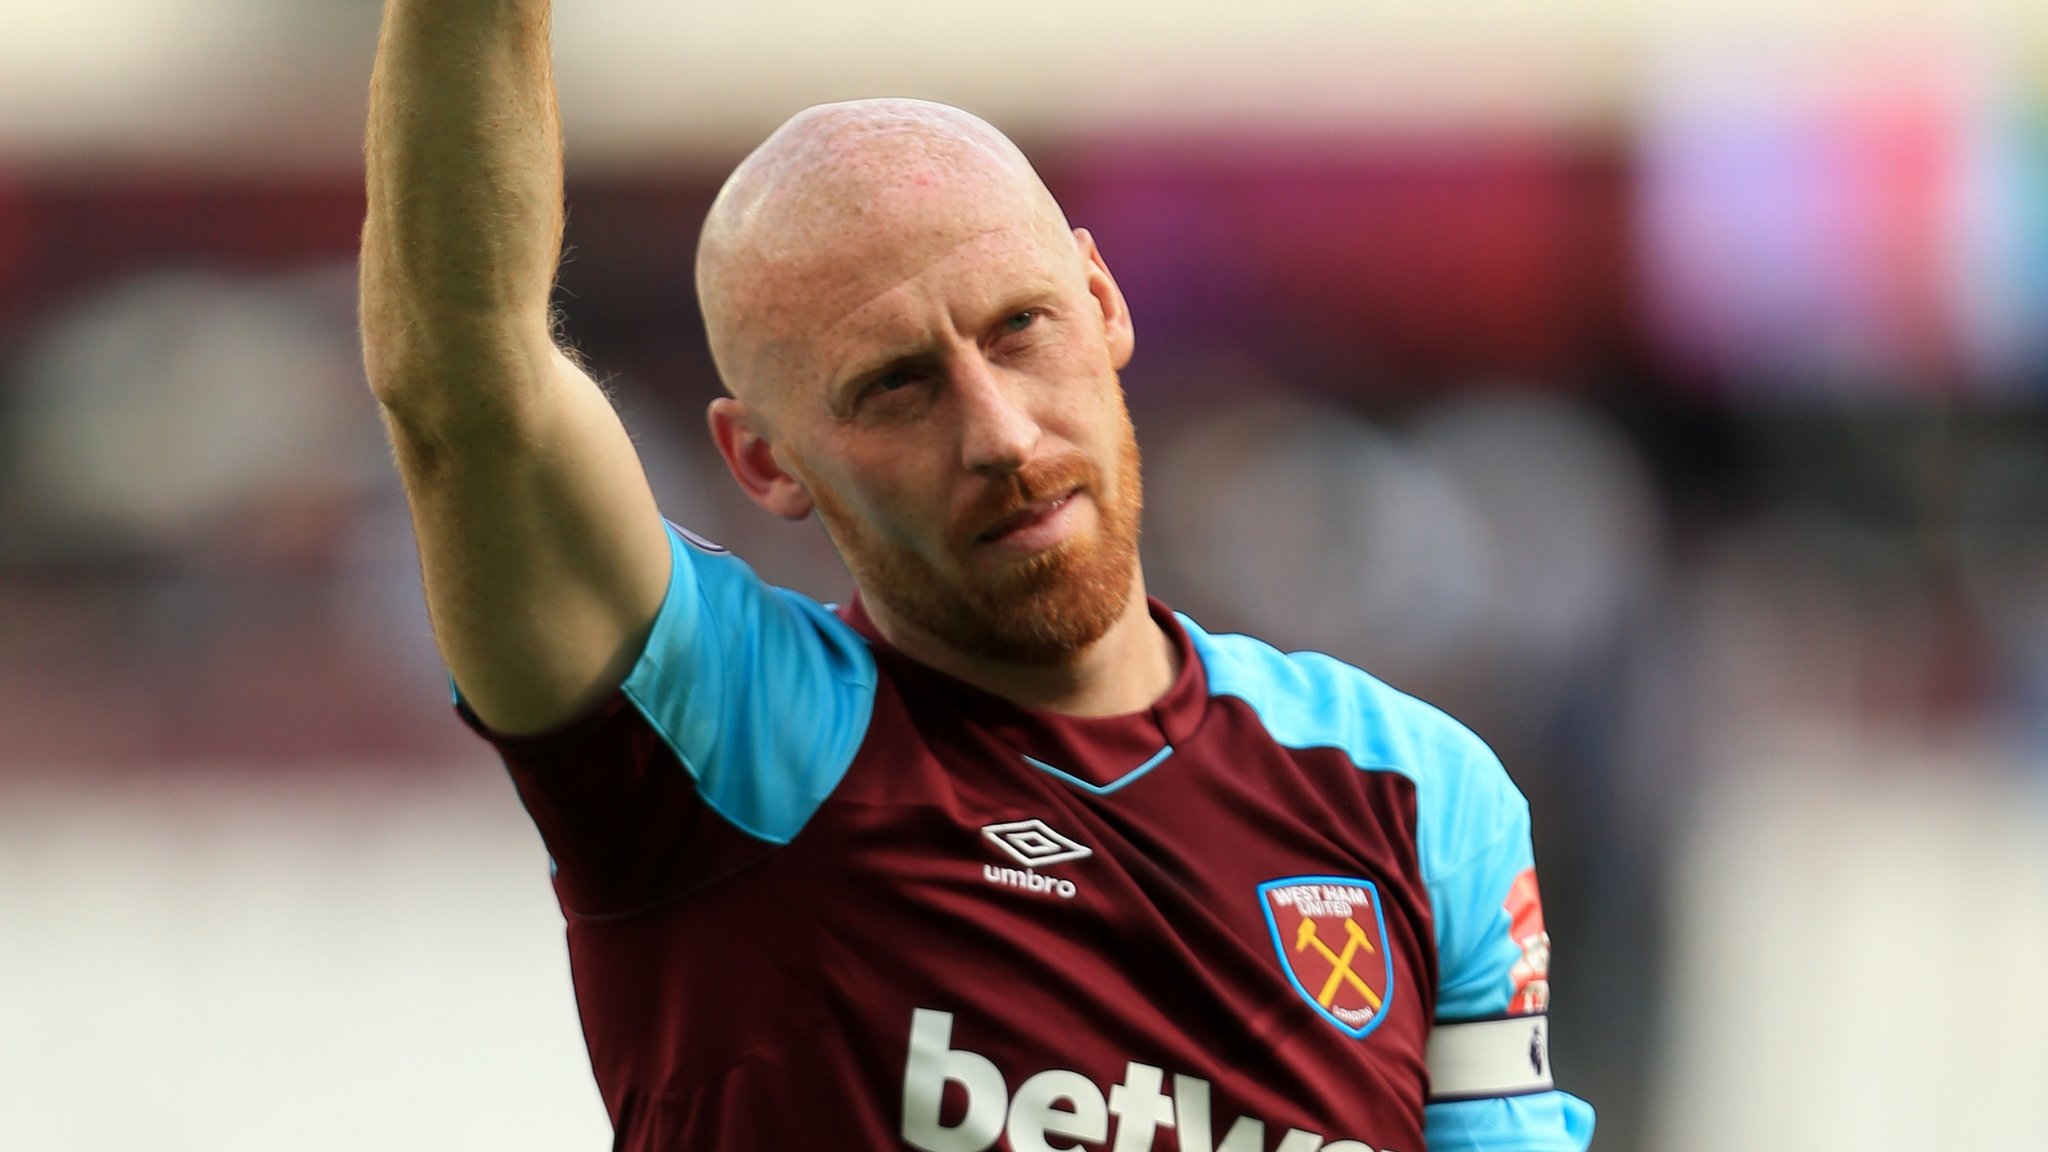 West Ham: James Collins and Patrice Evra to leave this summer